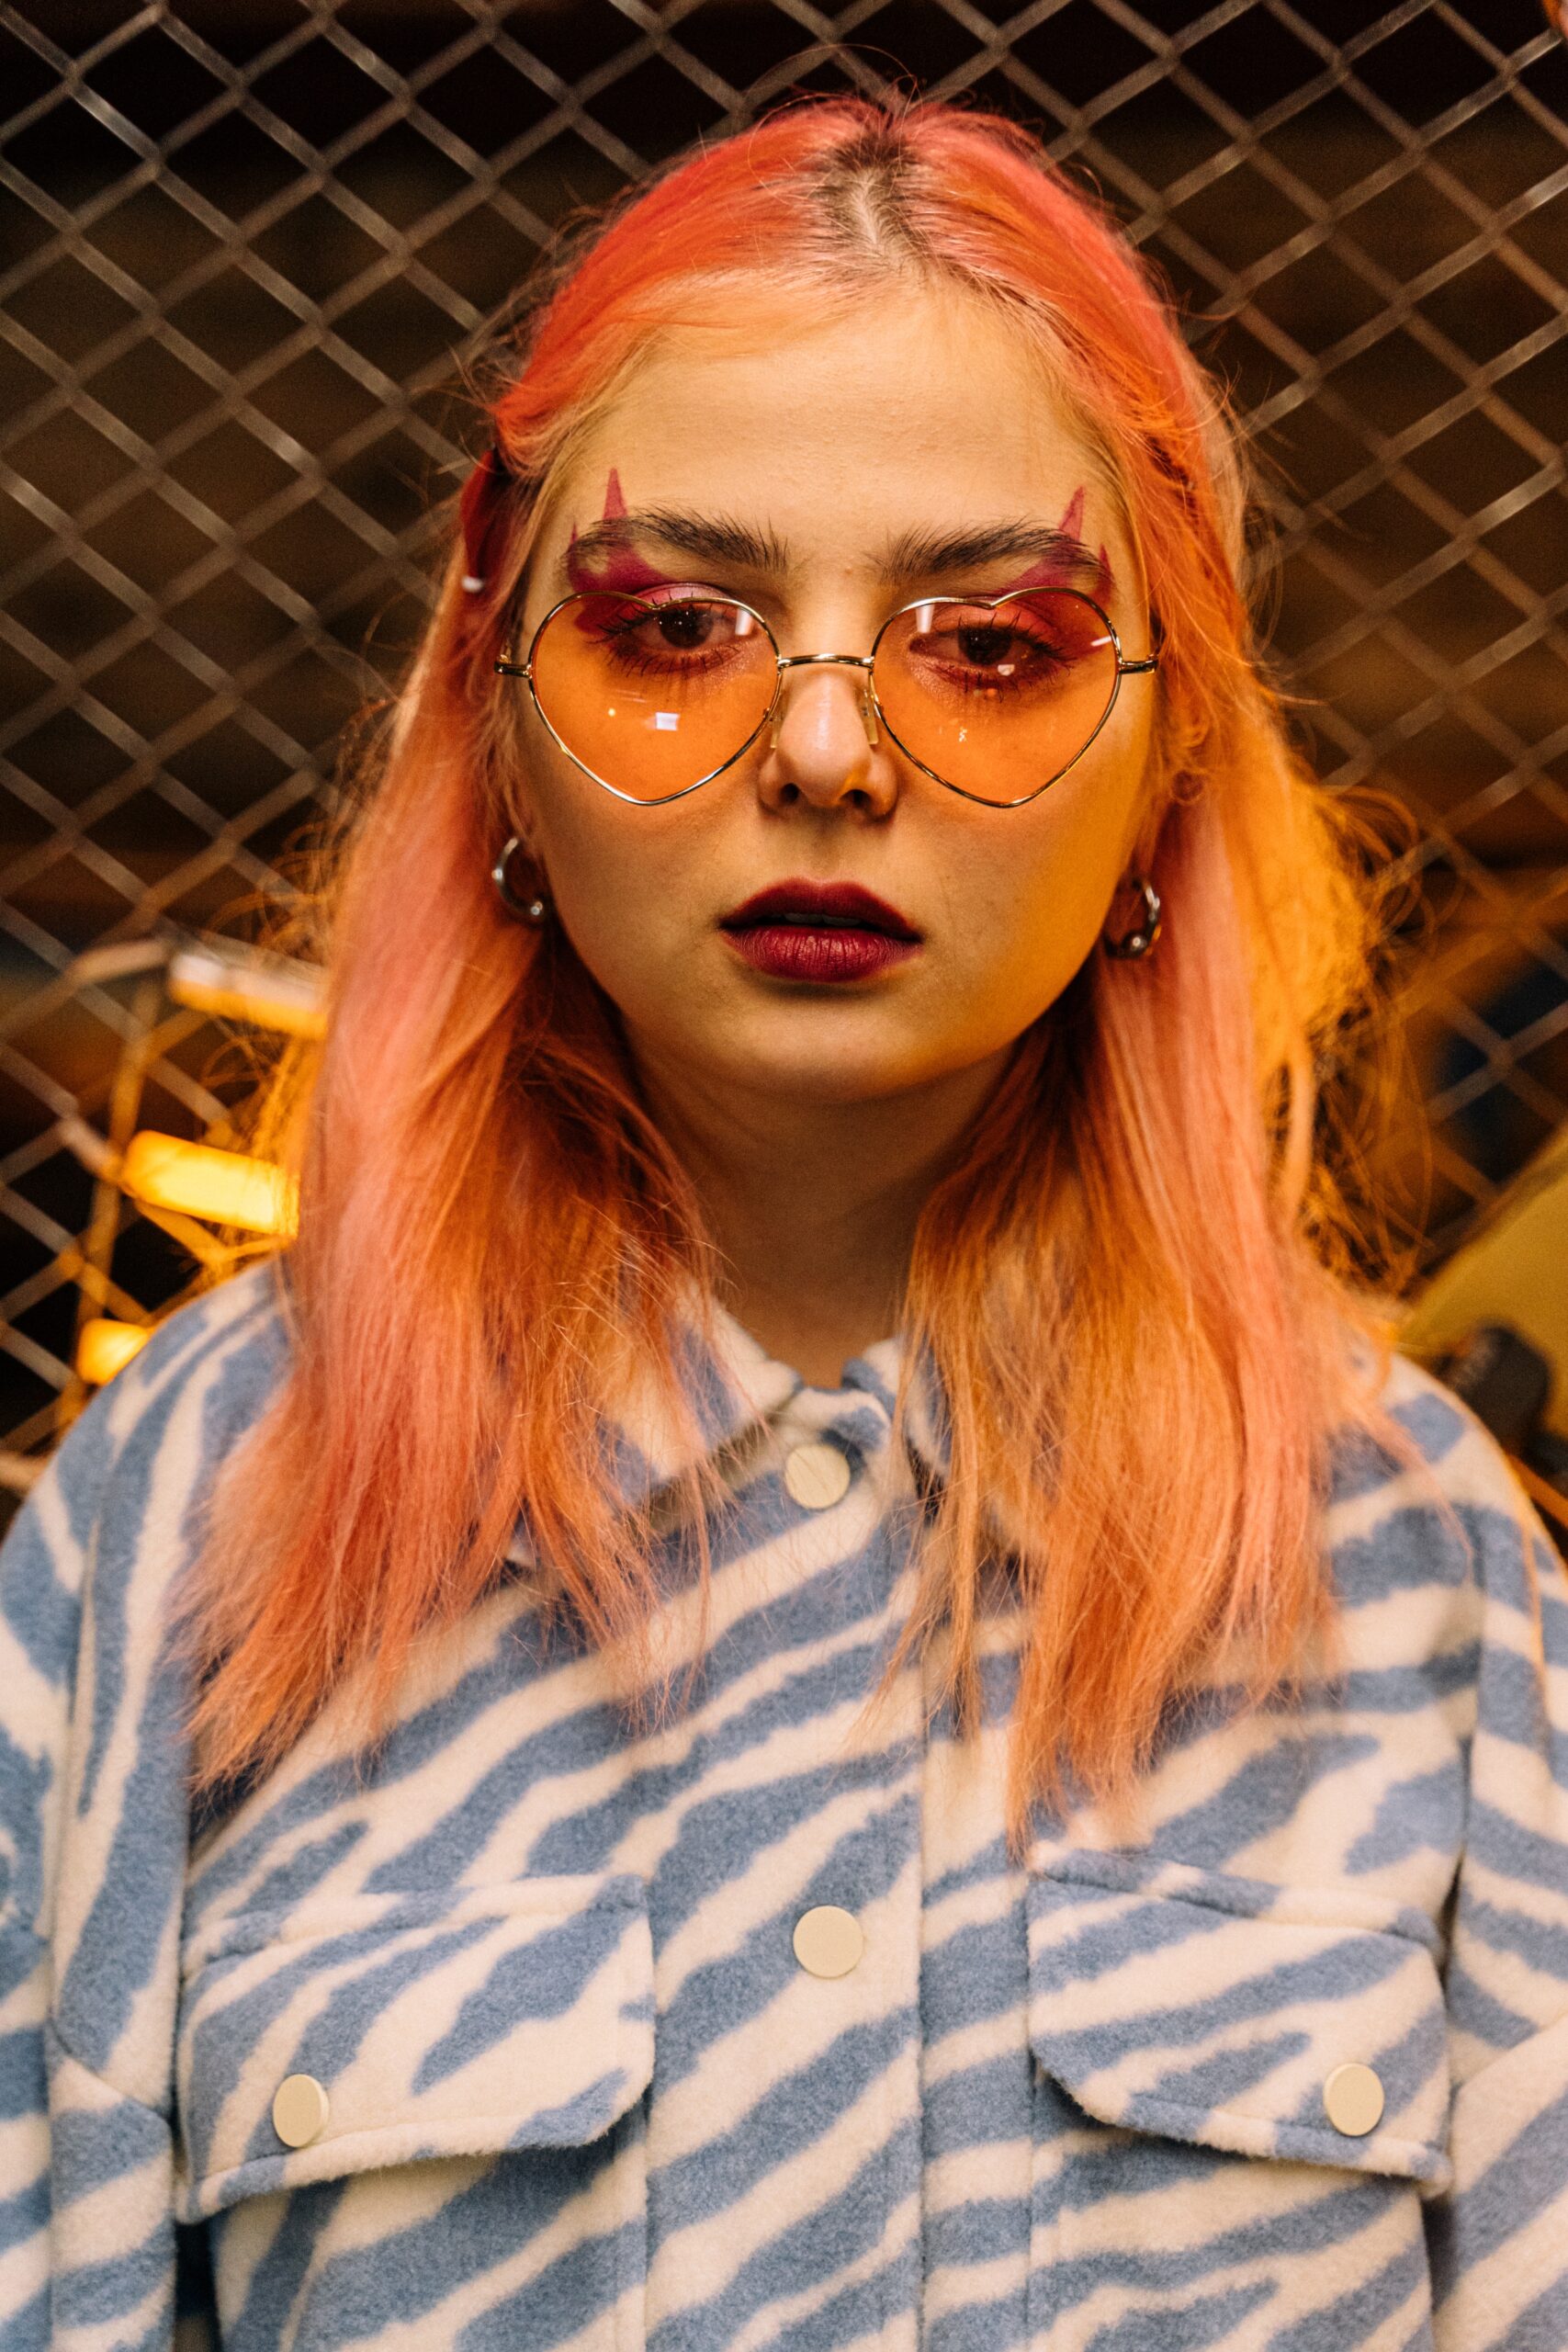 Young woman with pink hair wearing heart-shaped glasses